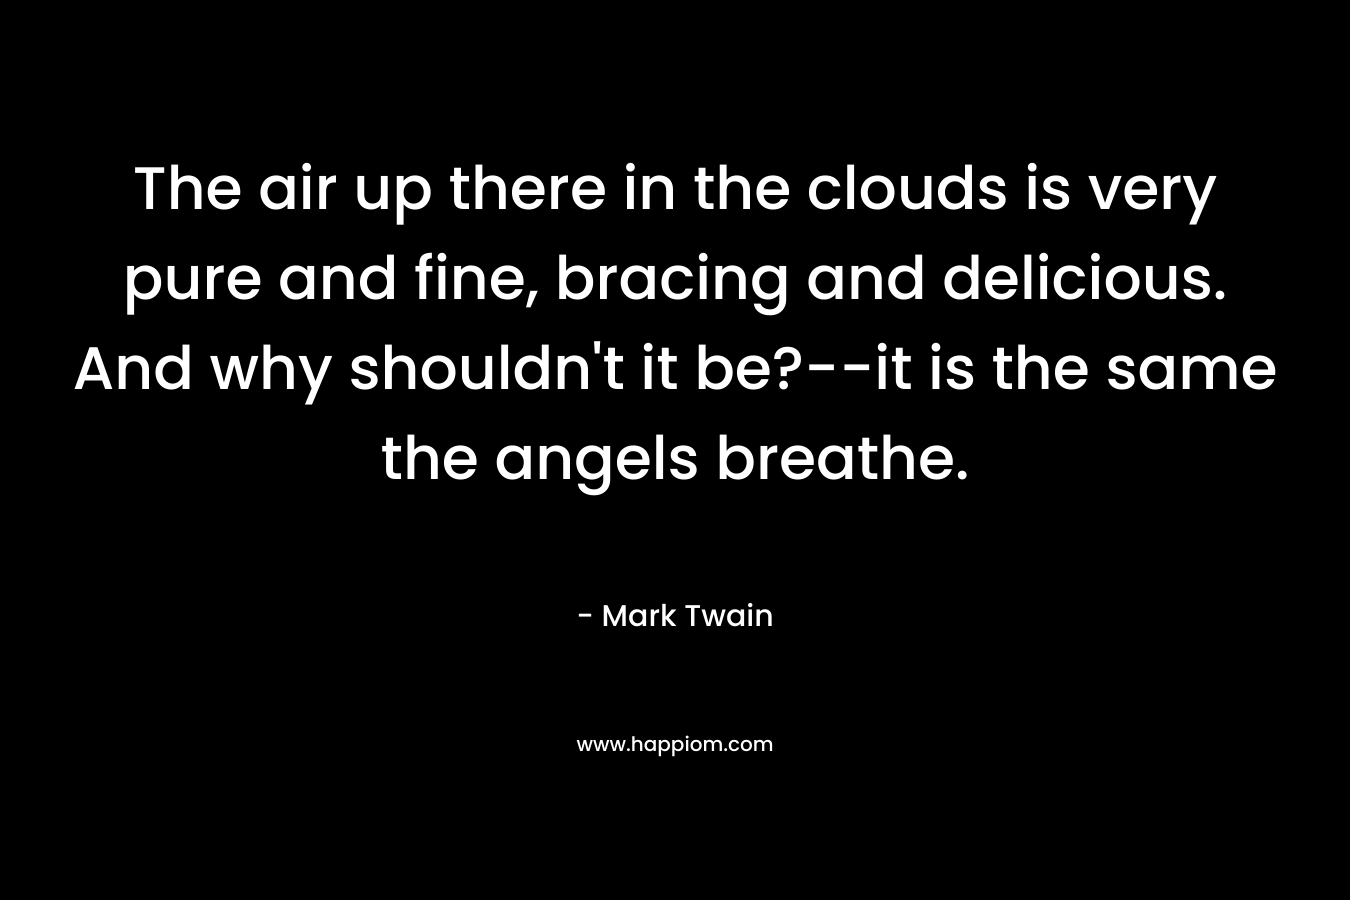 The air up there in the clouds is very pure and fine, bracing and delicious. And why shouldn’t it be?–it is the same the angels breathe. – Mark Twain